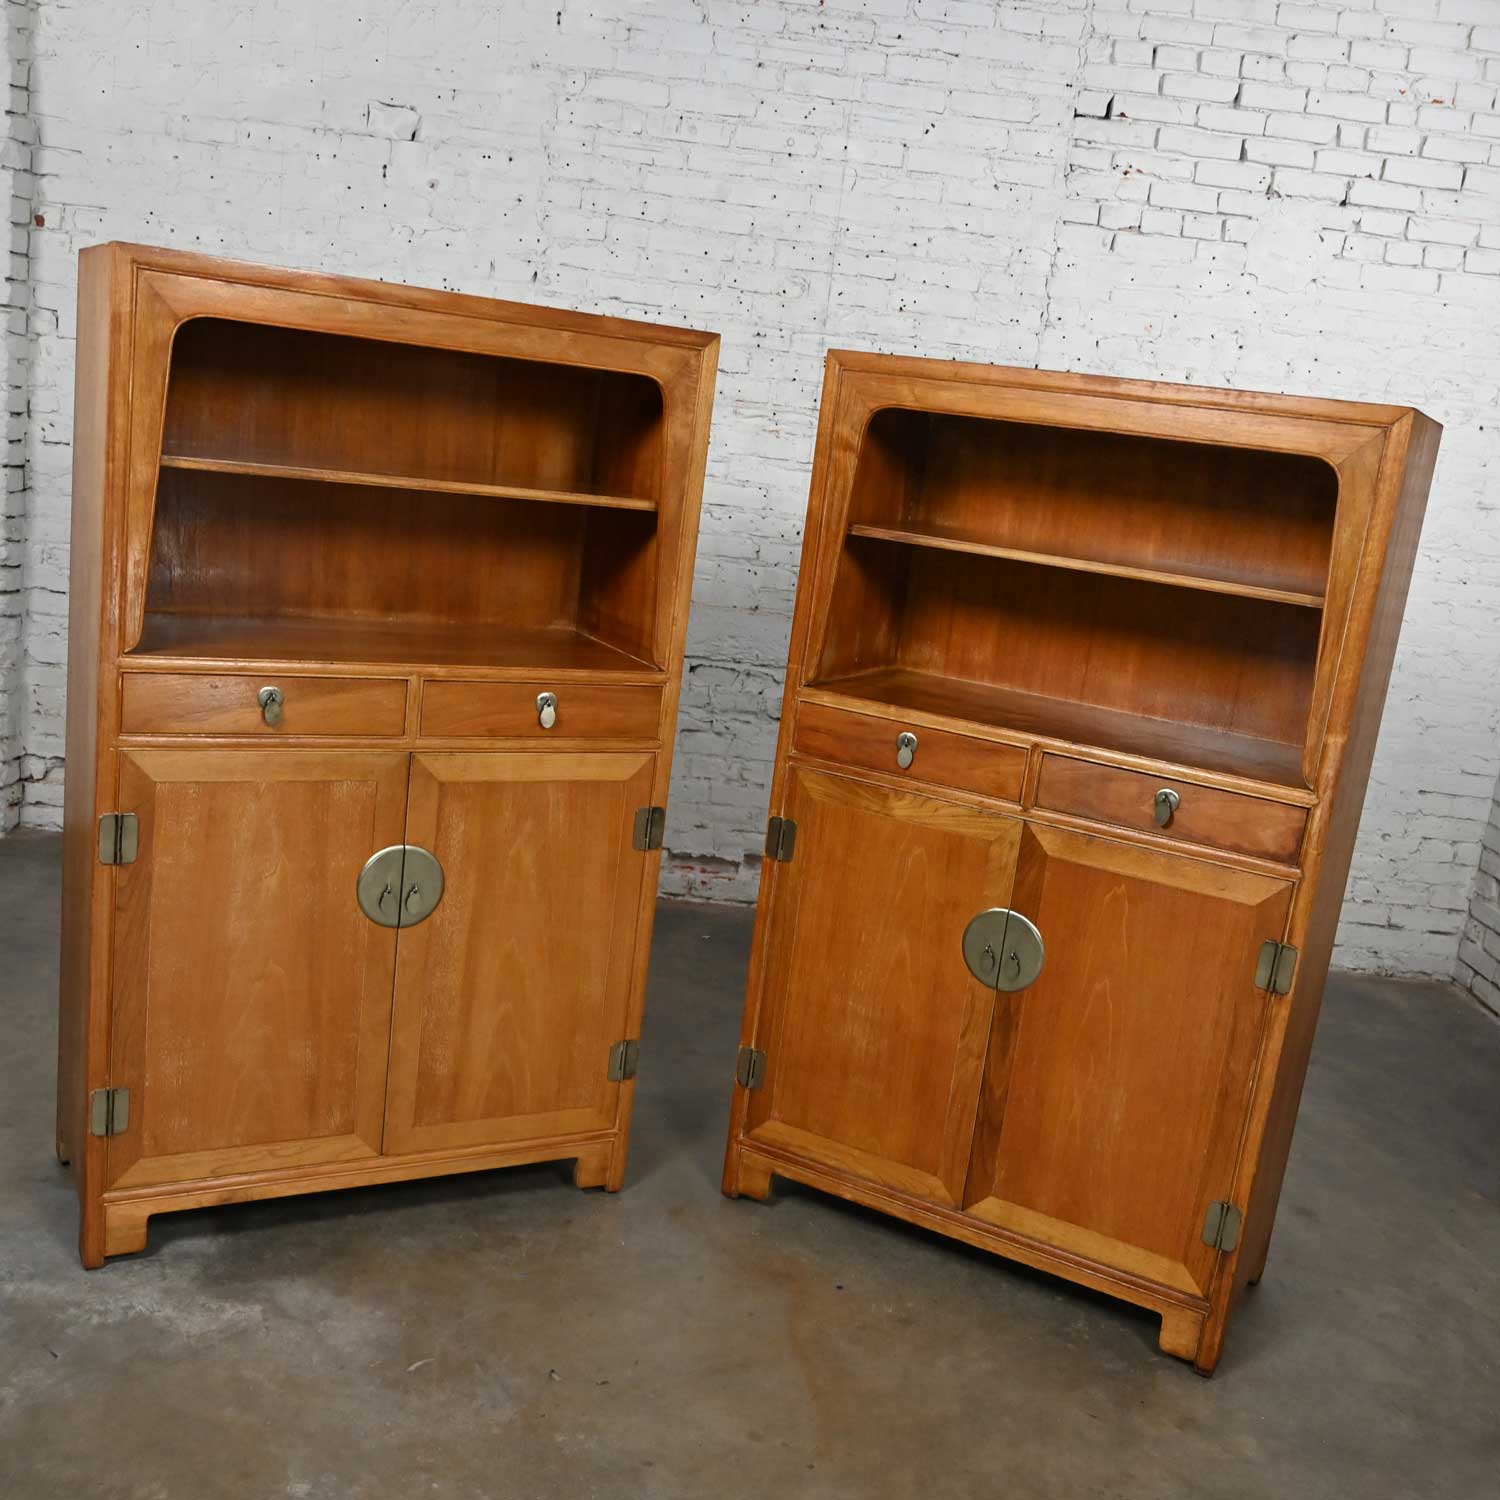 Pair 1950’s Asian Style Baker Furniture Far East Collection by Michael Taylor Natural Elmwood Colonnade Cabinet